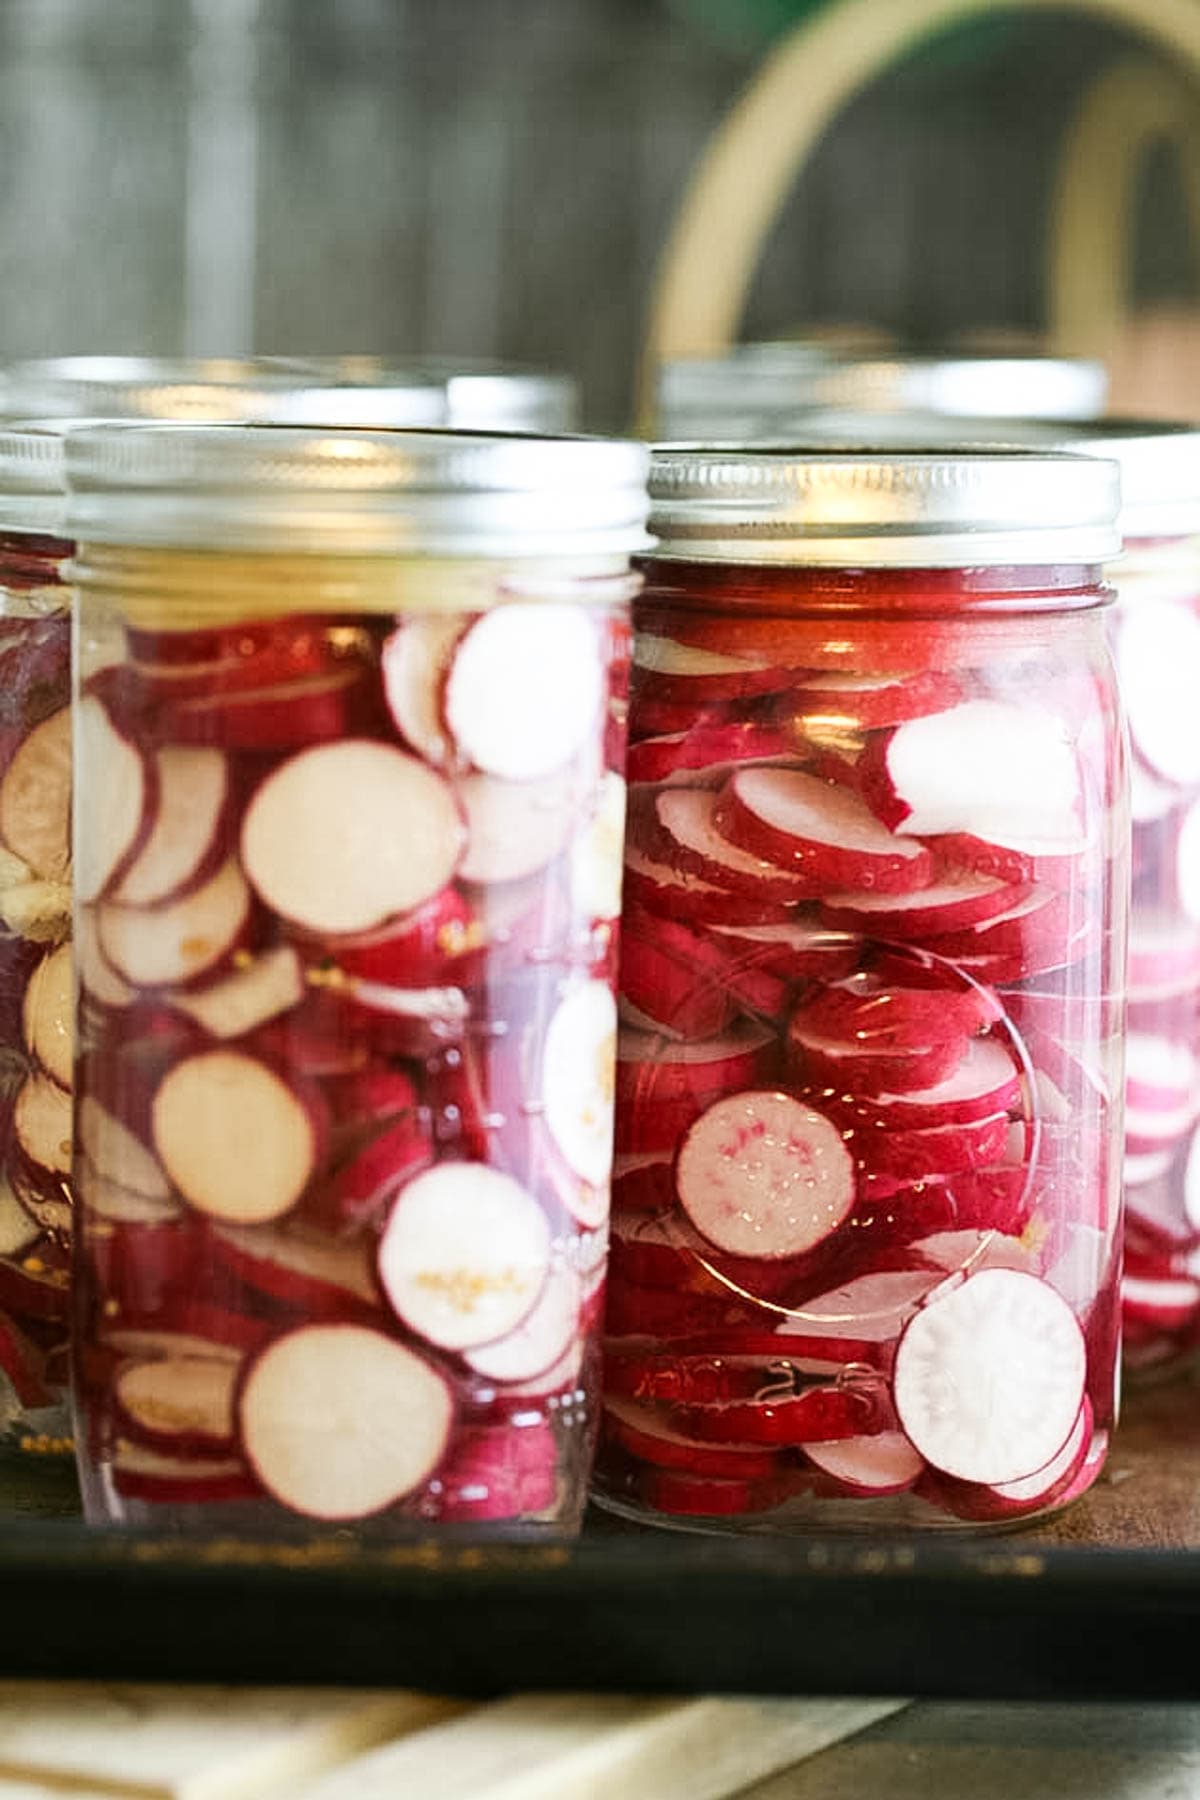 Placing the jars of fermented radish on a sheet pan or plate.